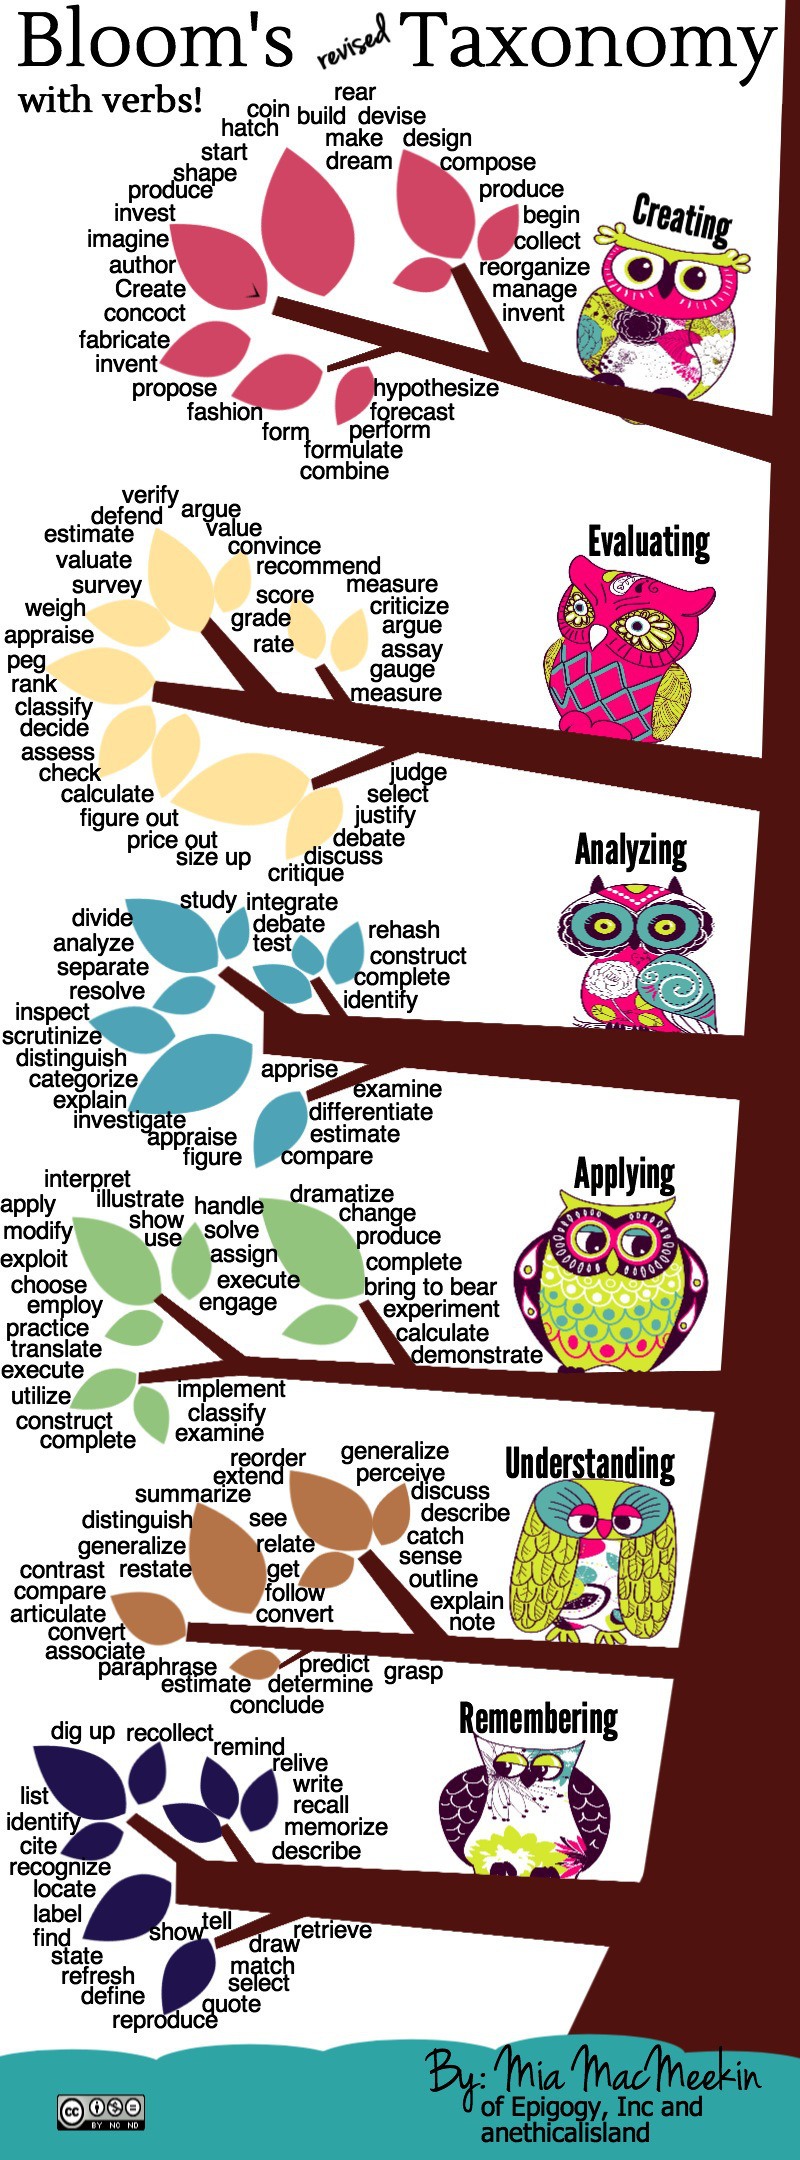 Bloom's Revised Taxonomy Action Verbs infographic